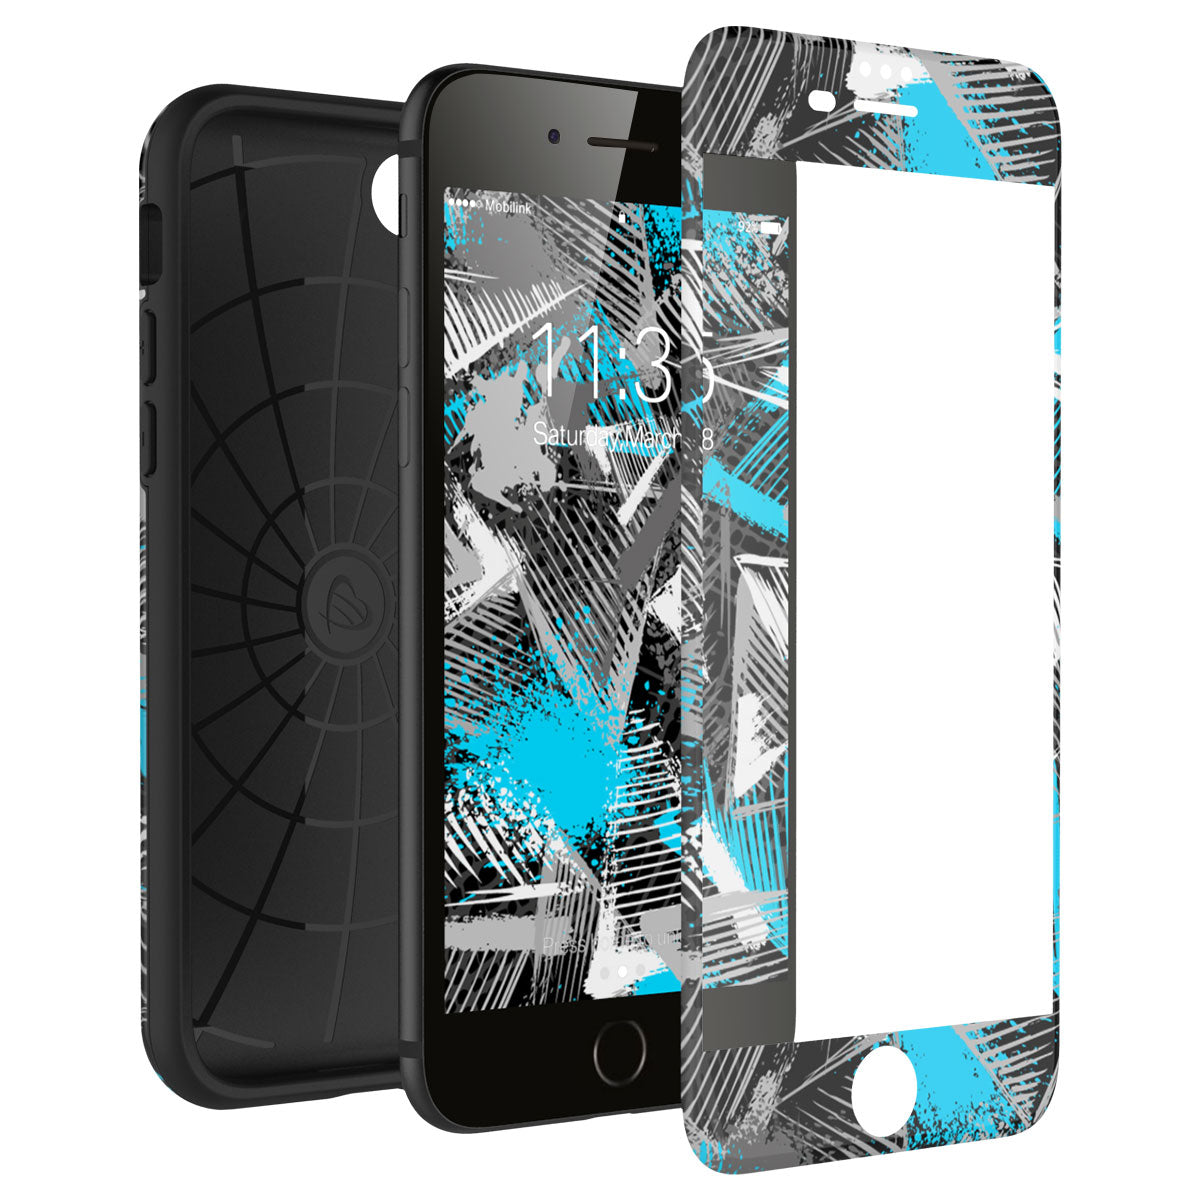 LUVVITT ARTOLOGY Case and Tempered Glass Set for iPhone 7/8 Plus - Bundle P003